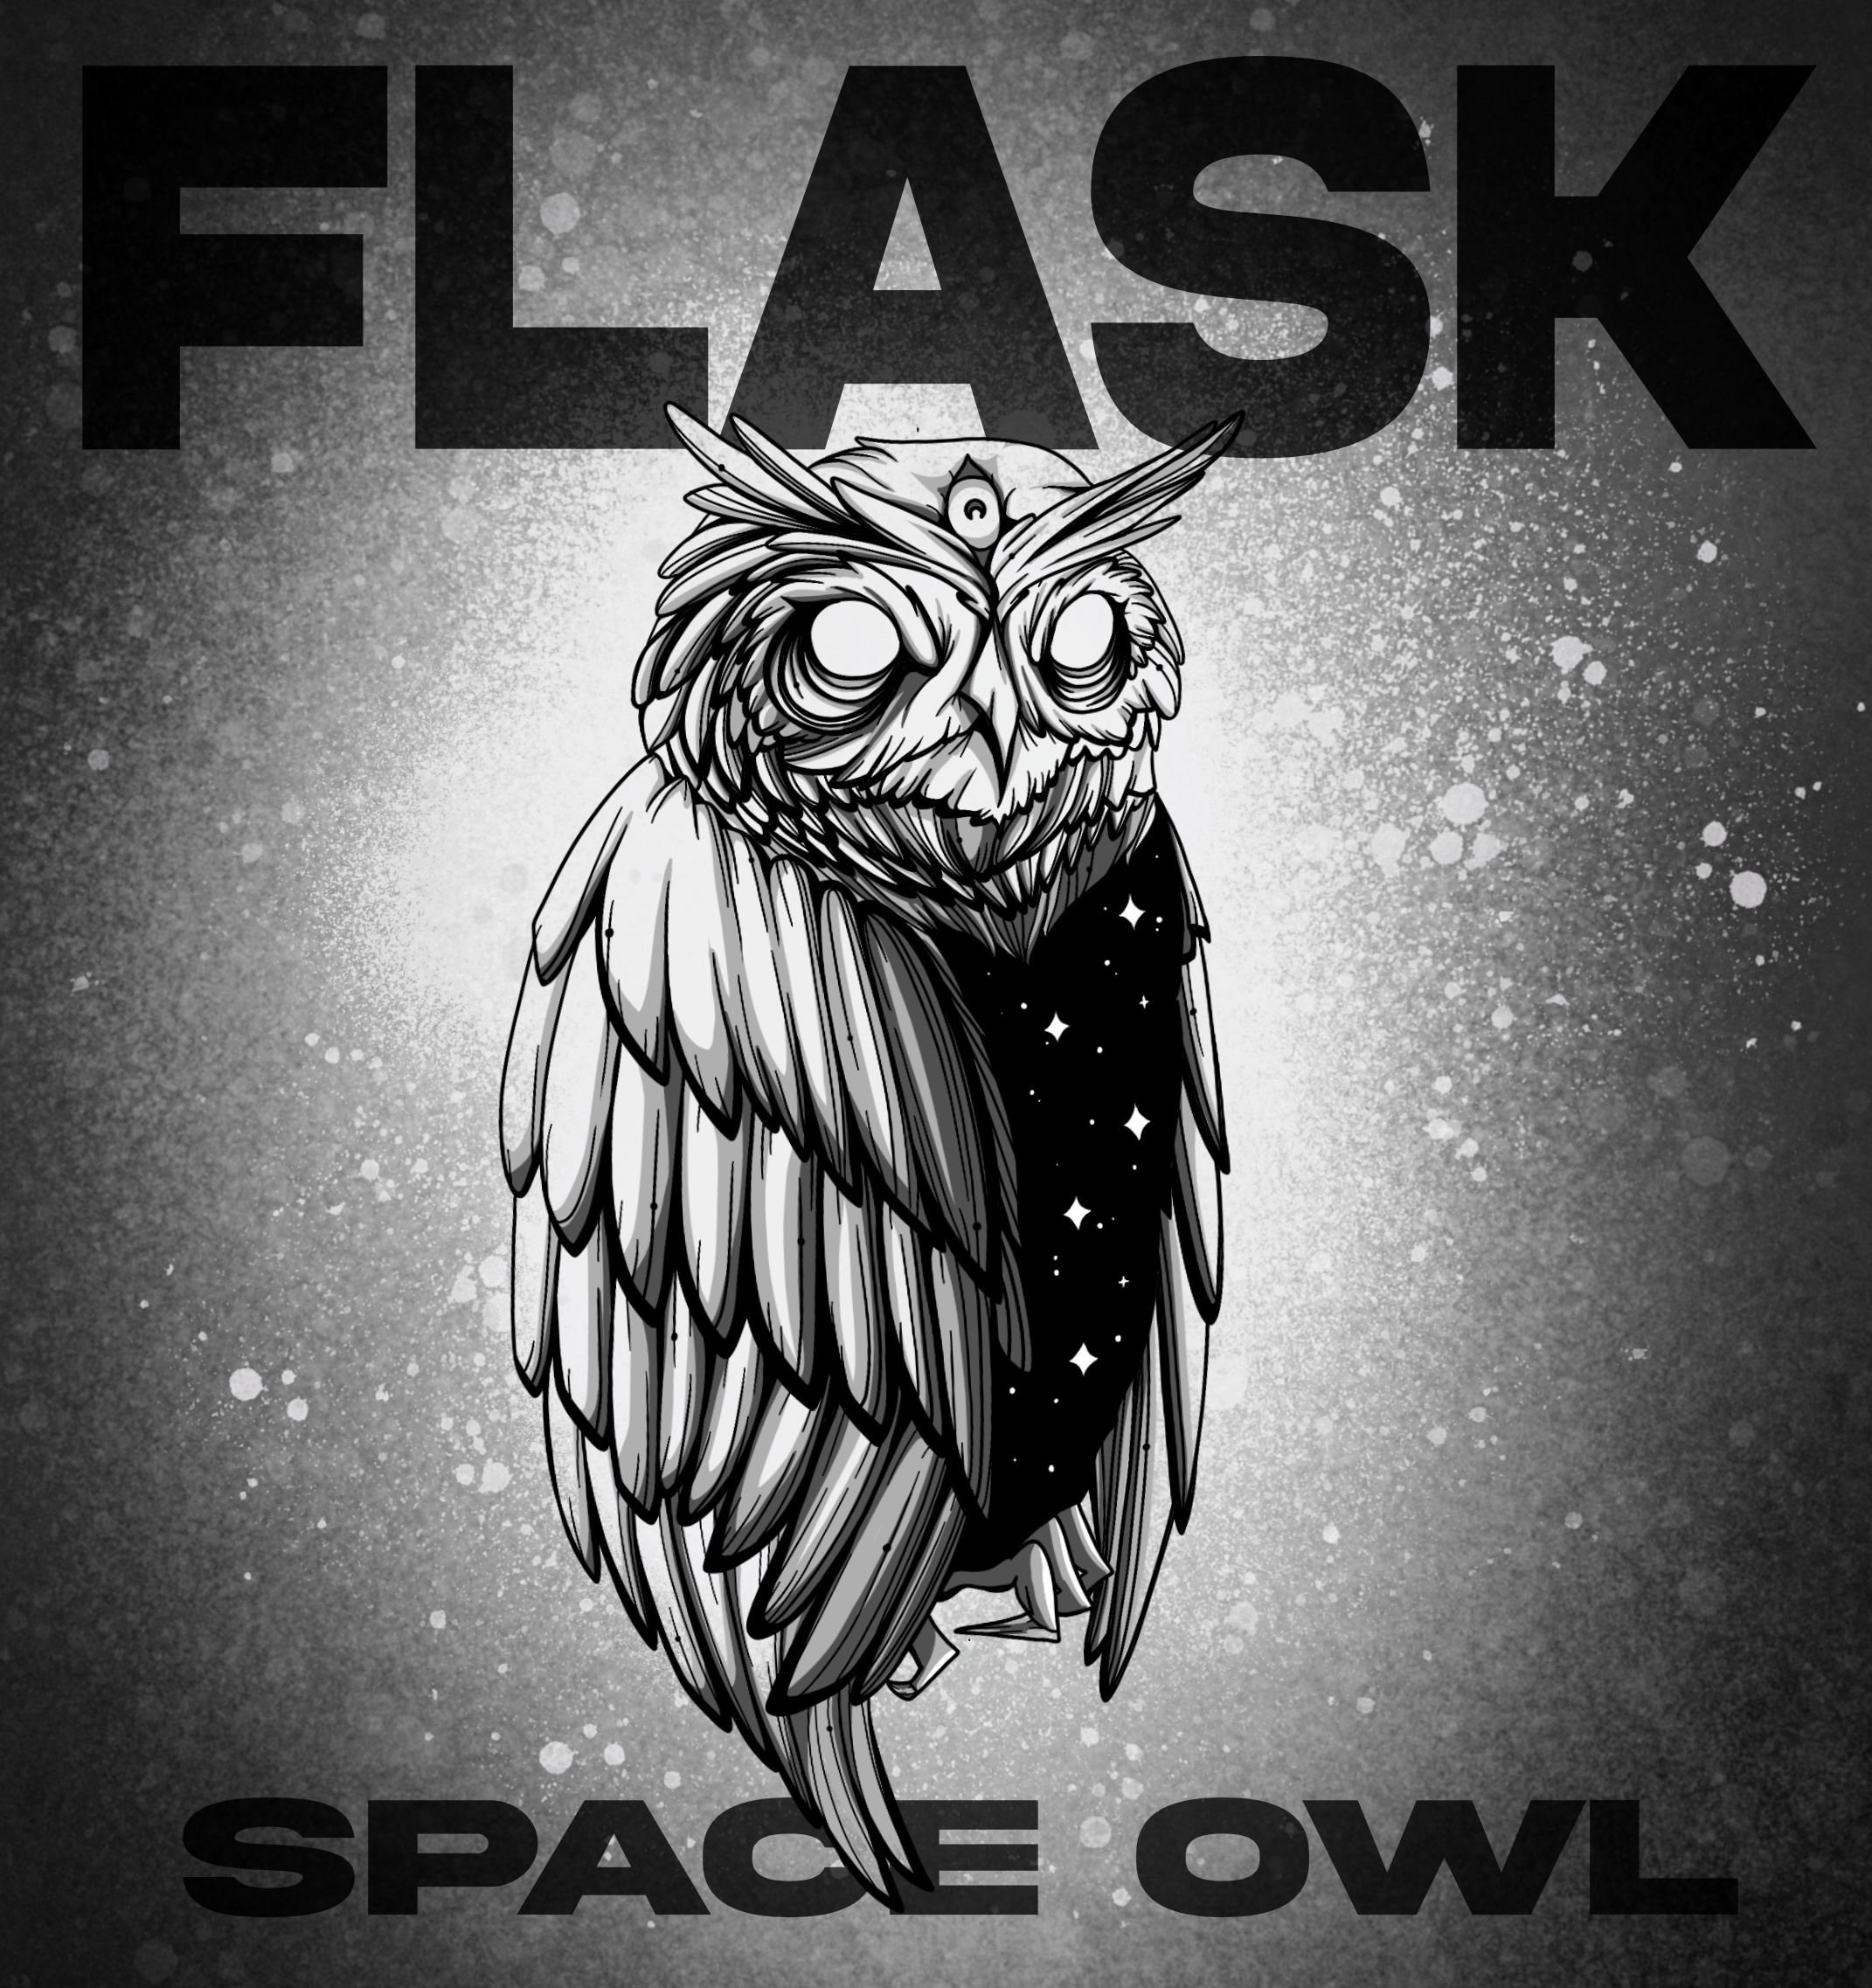 FLASK by Space Owl cover artwork